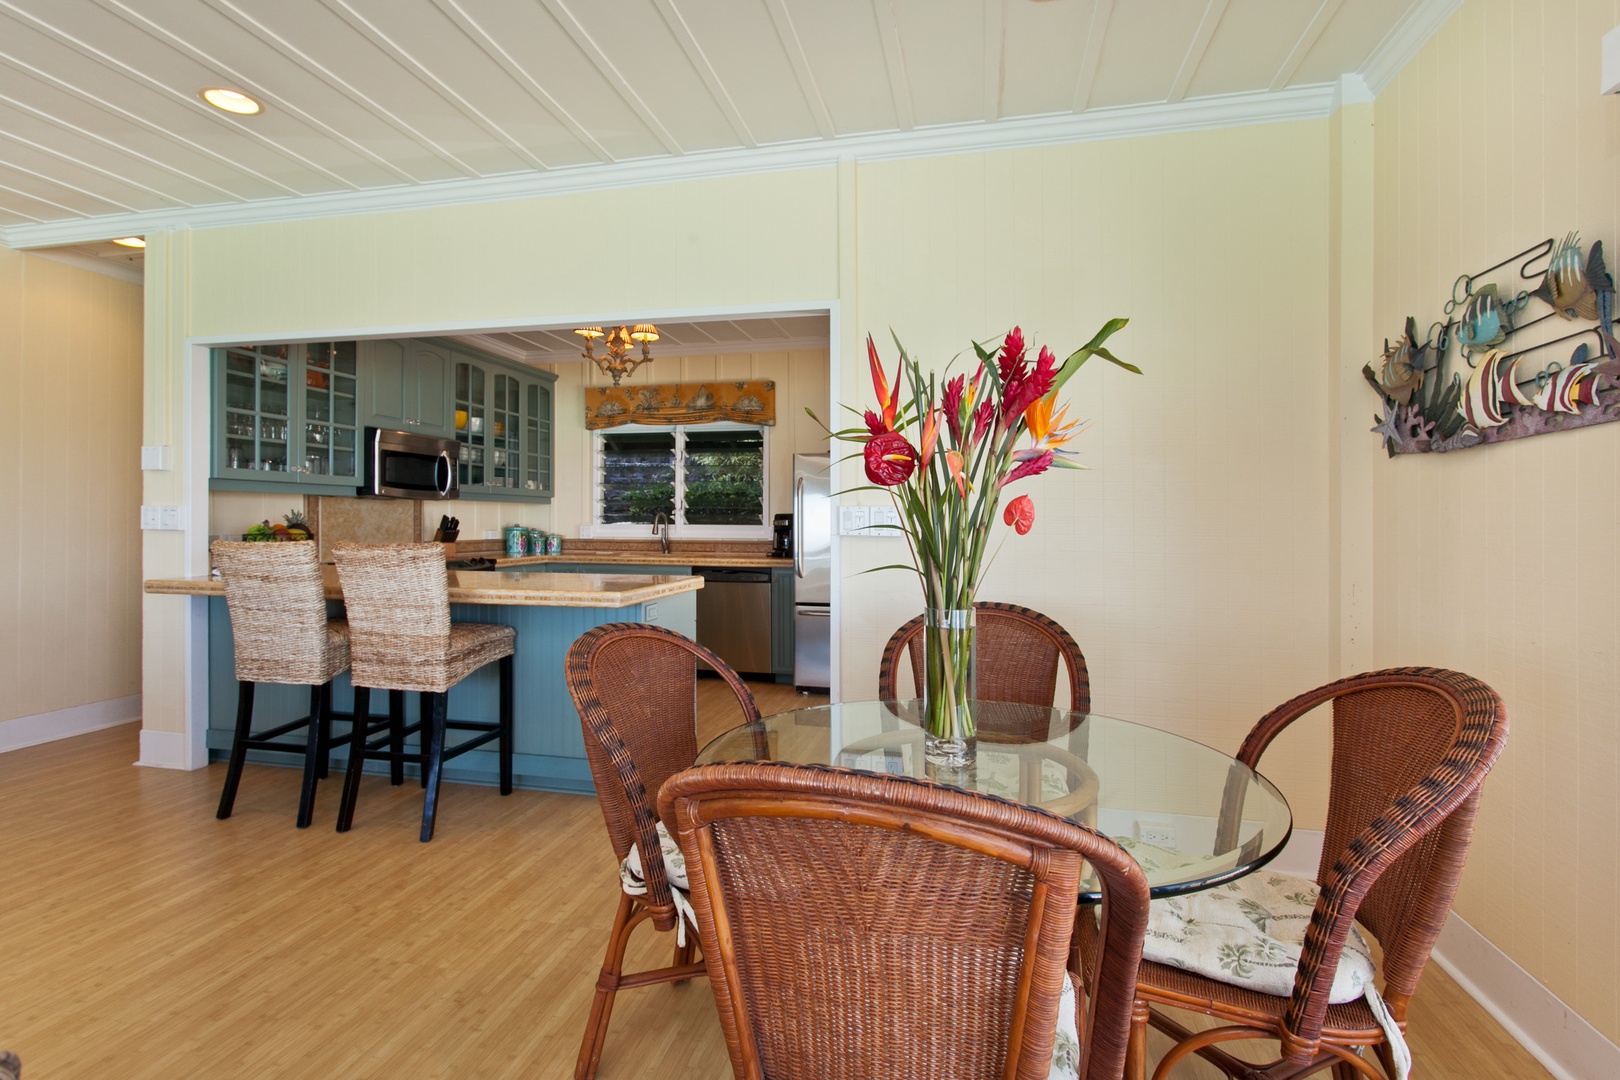 Kailua Vacation Rentals, Hale Kainalu* - Dinette for four, convertible to a breakfast nook, perfect for every meal.